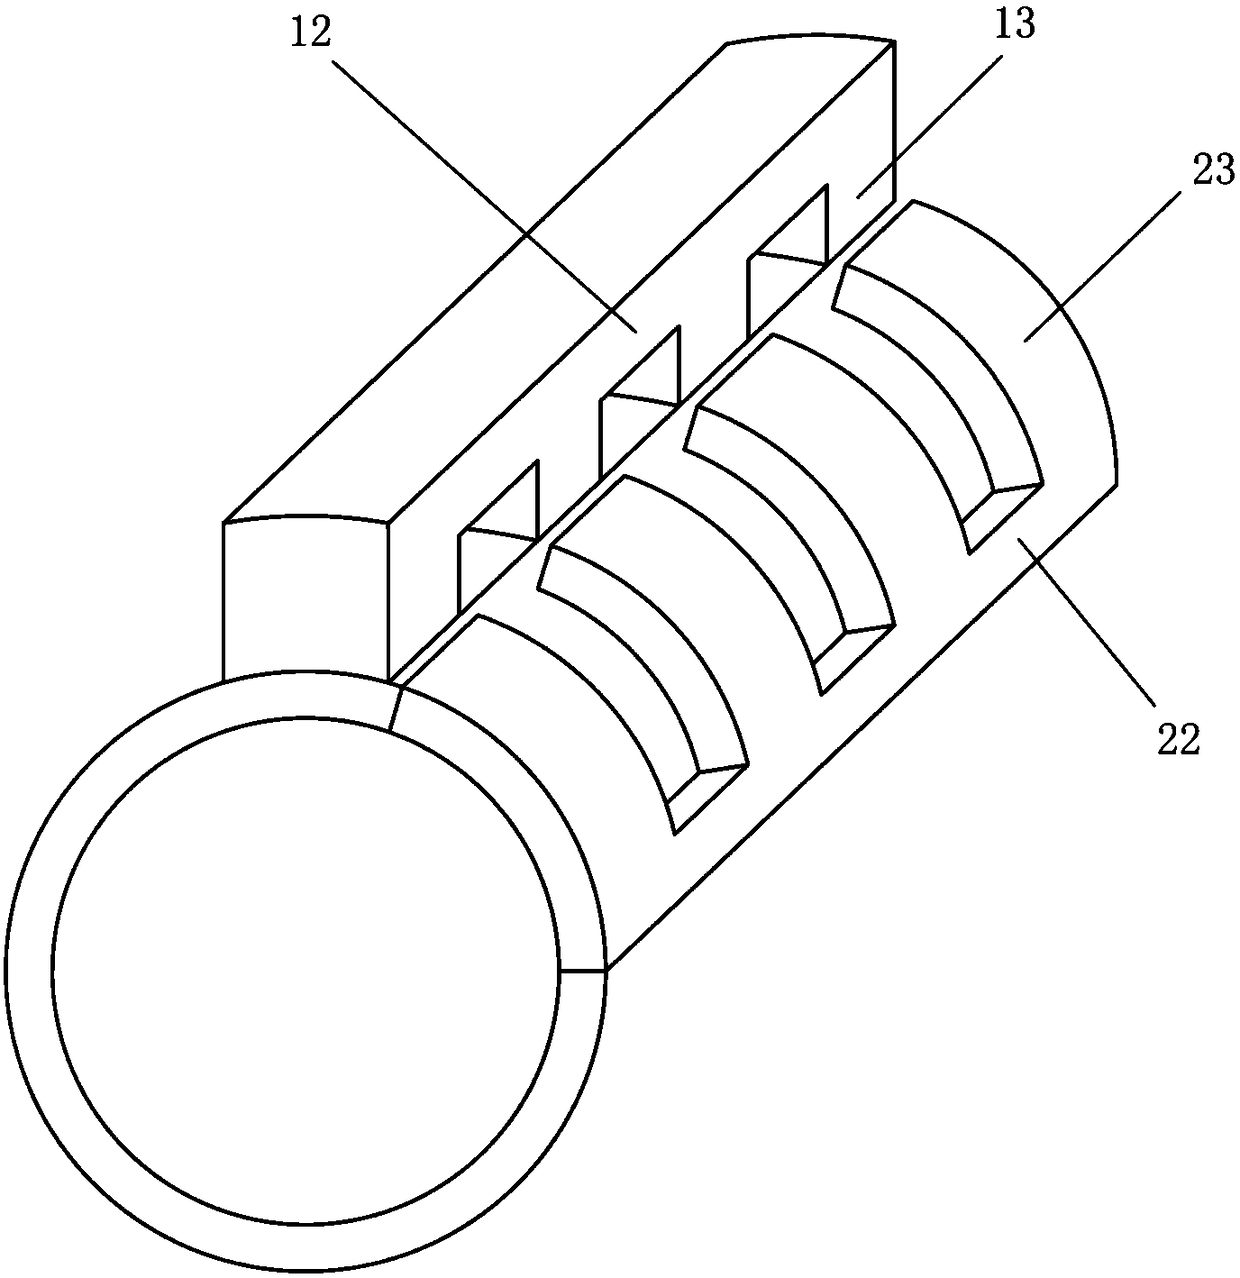 Switched reluctance motor including U-shaped rotor magnetic pole structure